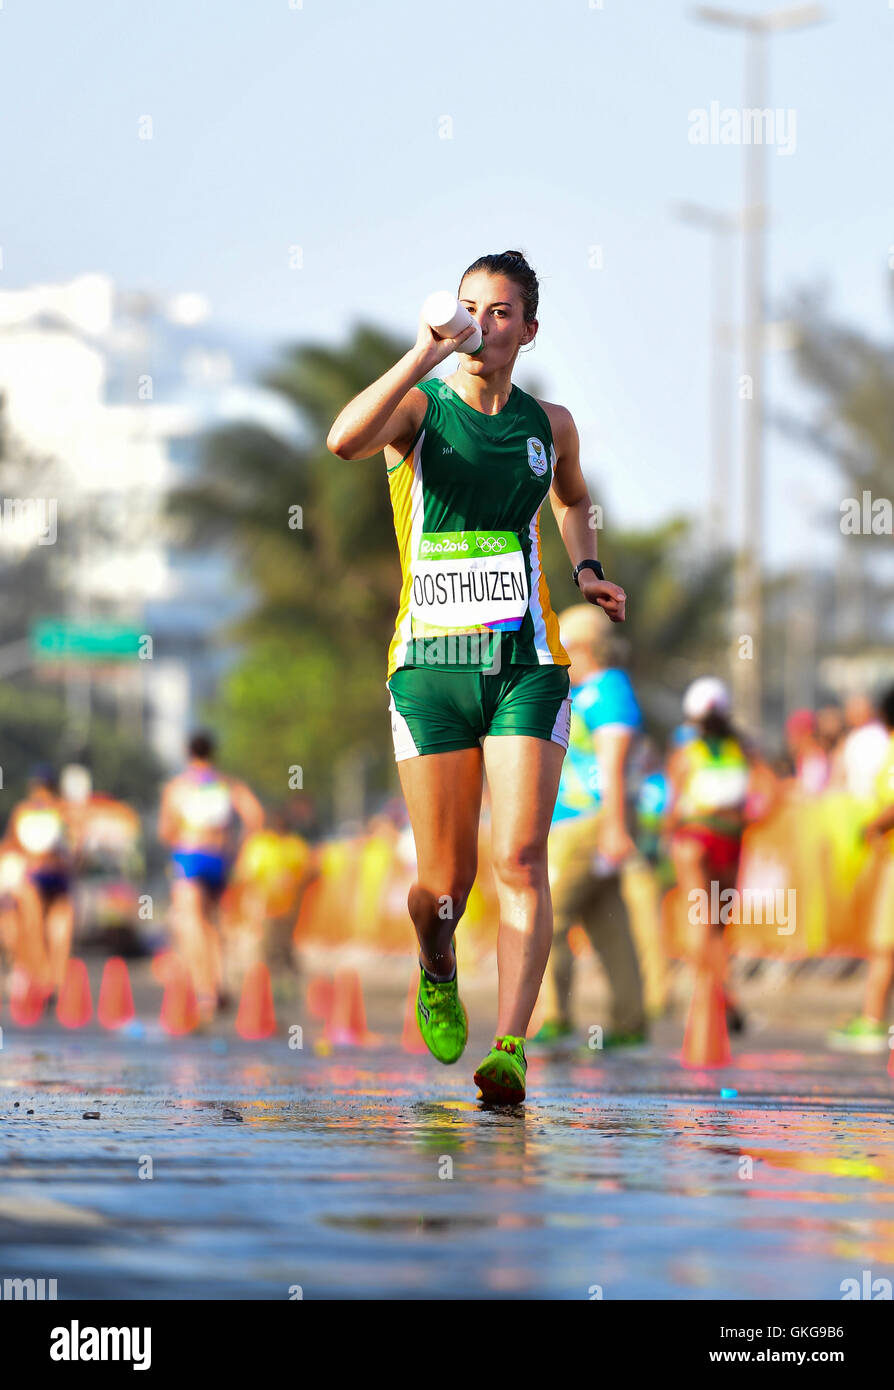 Rio de Janeiro, Brazil. 19th August, 2016. Anel Oosthuizen of South Africa during the womens 20km race walk on Day 14 of the 2016 Rio Olympics at Pontal on August 19, 2016 in Rio de Janeiro, Brazil. (Photo by Roger Sedres/Gallo Images) Credit:  Roger Sedres/Alamy Live News Stock Photo